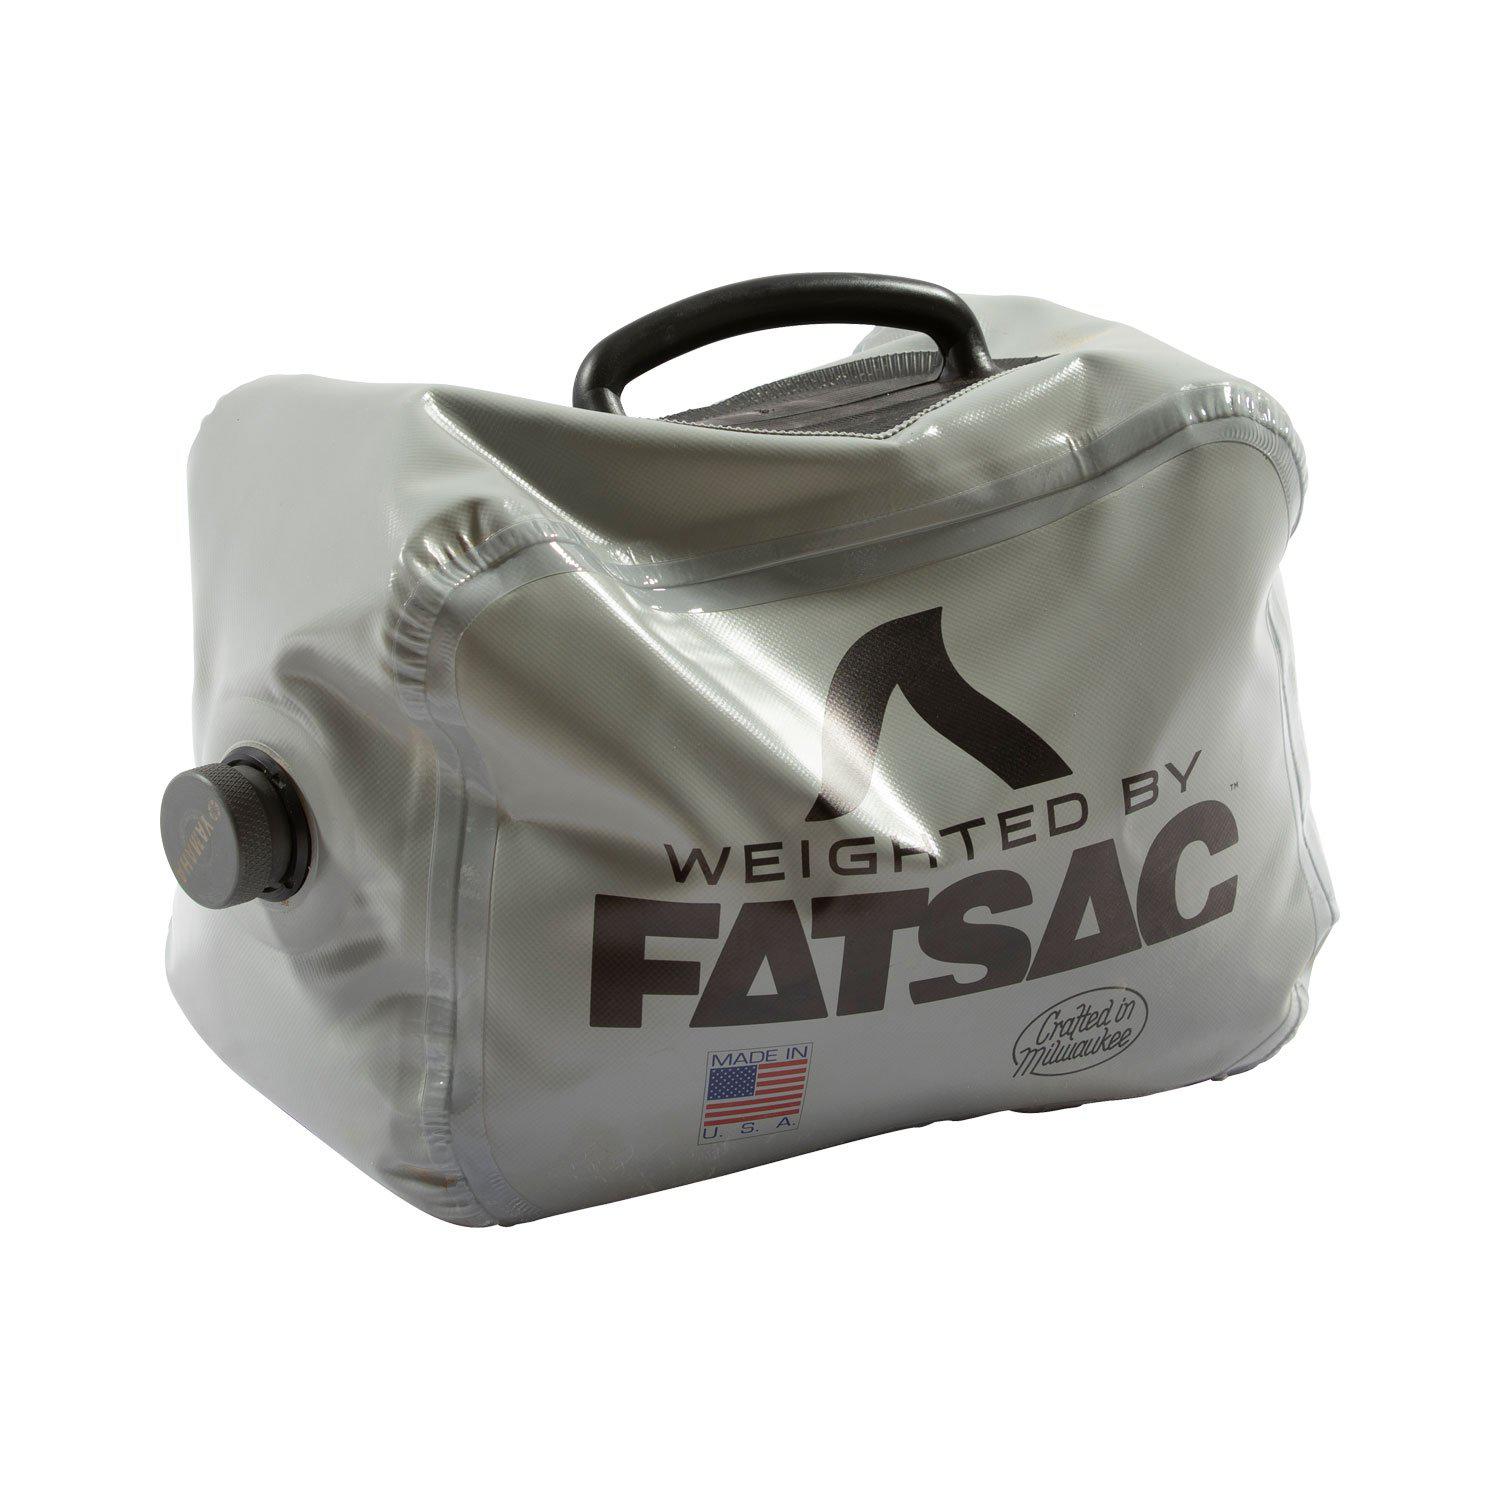 NautiCurl FatSac Fillable Weight Bags Ballast with easy lift handle - weight bag, lead wake, lead weight